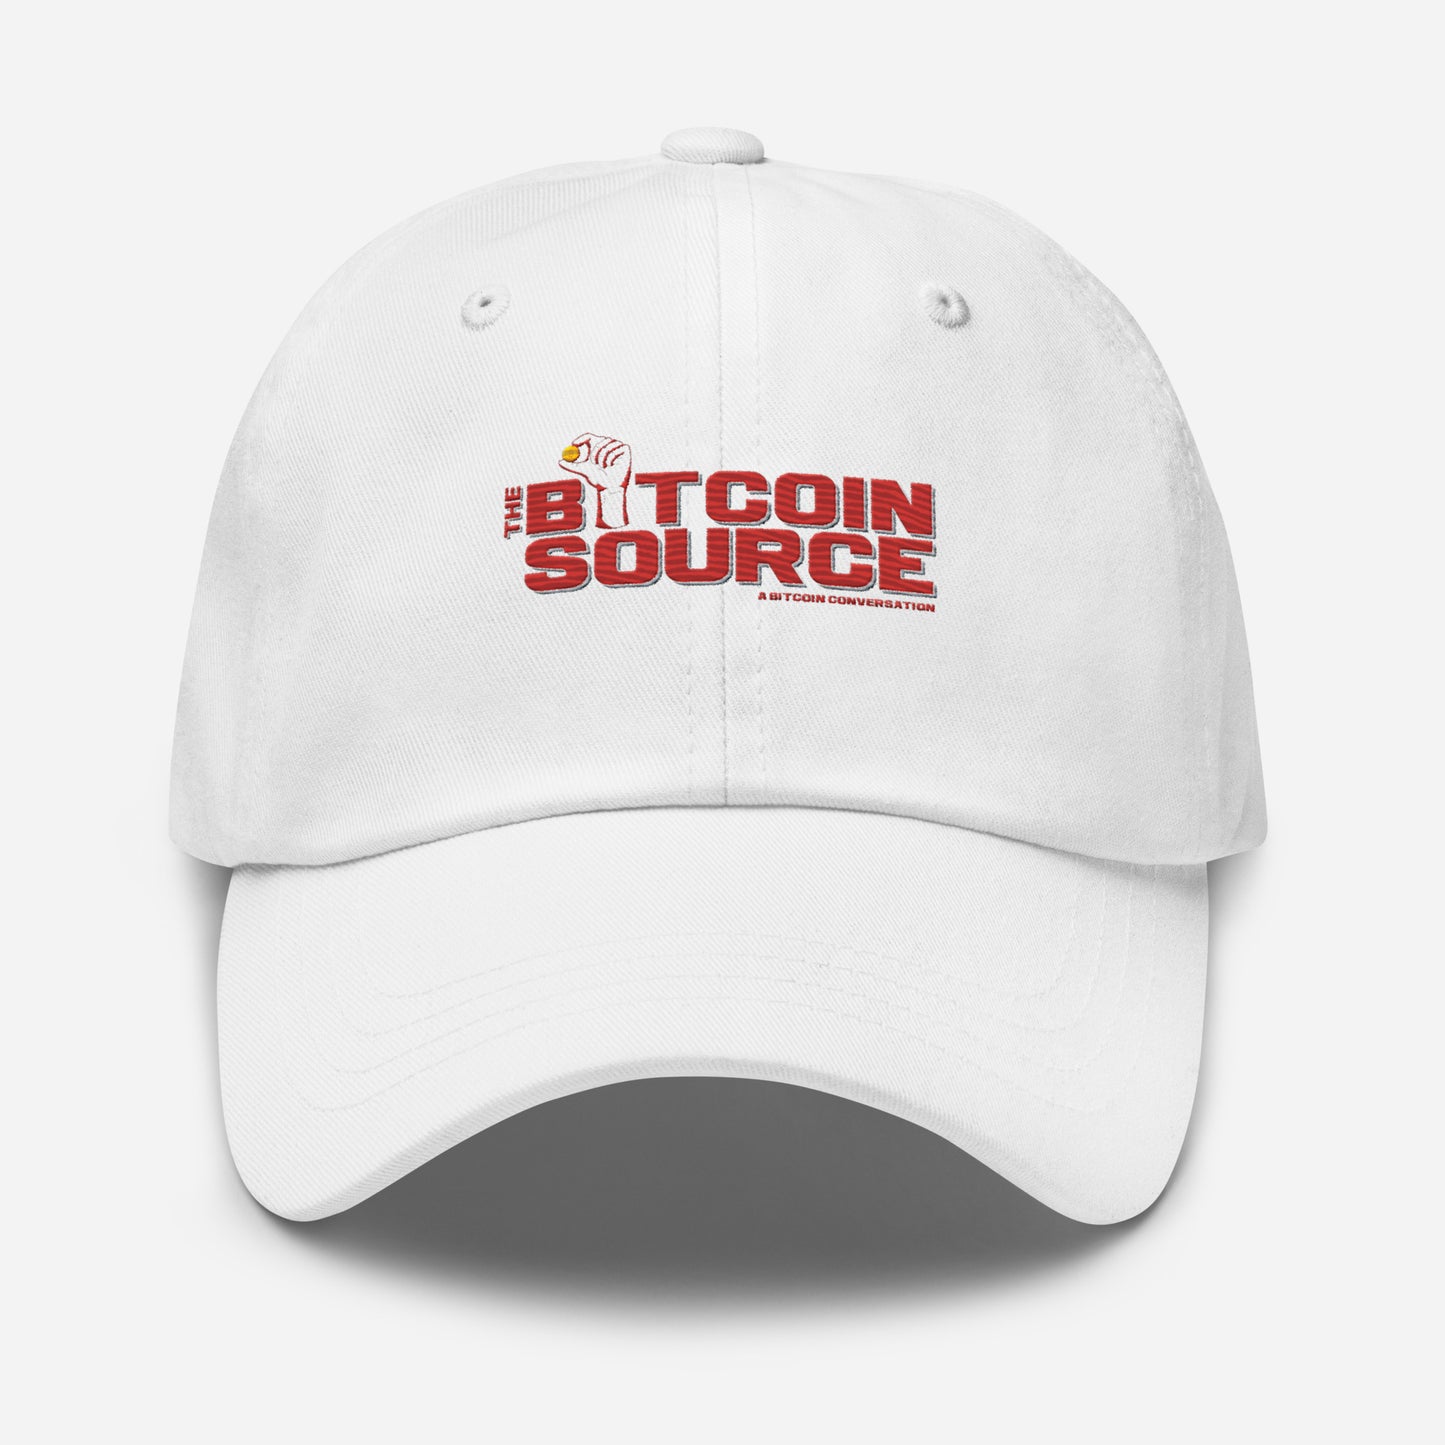 The Bitcoin Source Dad hat